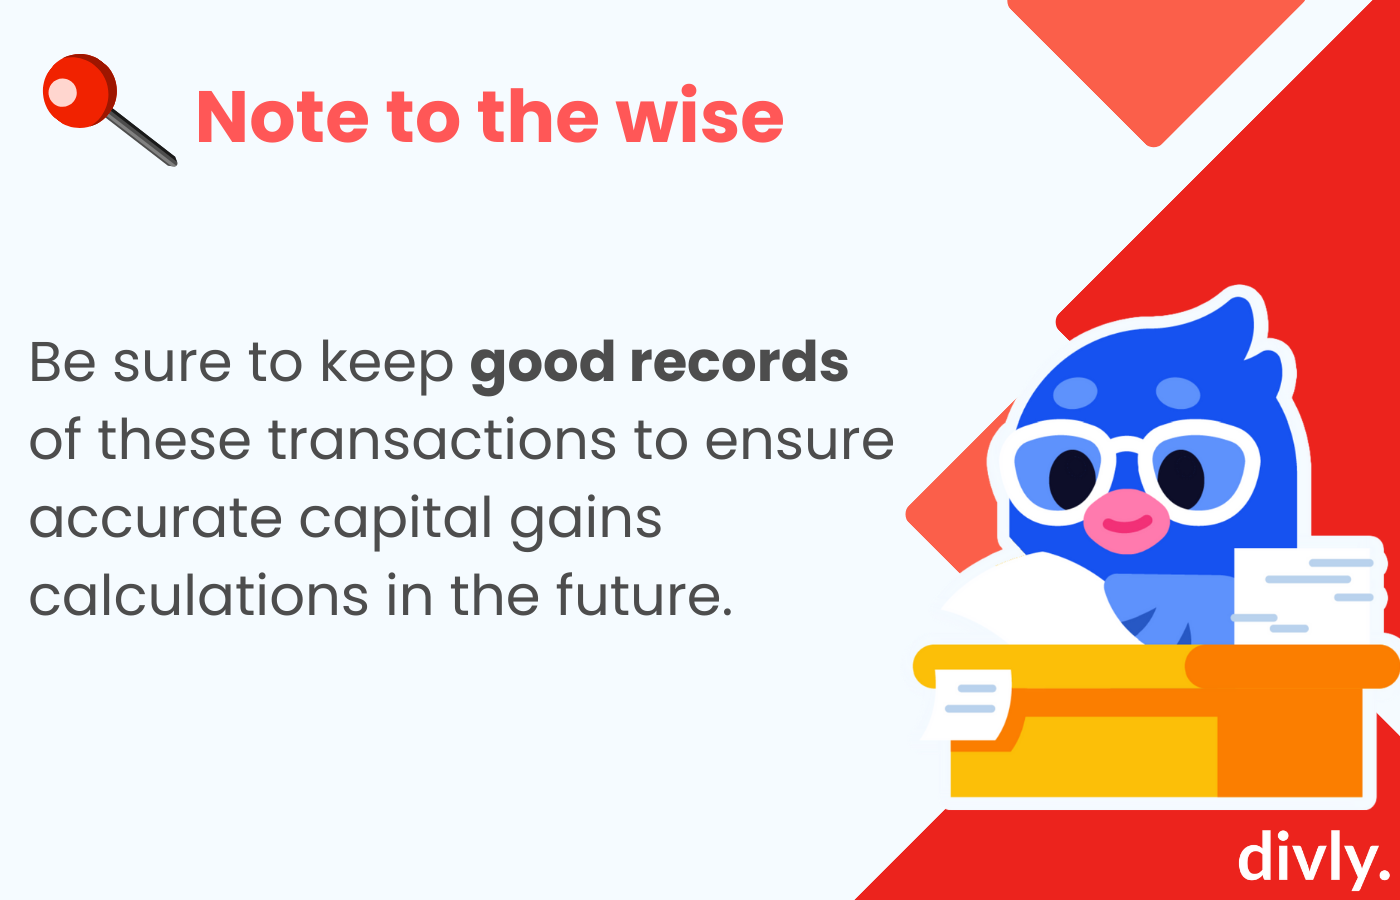 Be sure to keep good records of these transactions to ensure accurate capital gains calculations in the future.